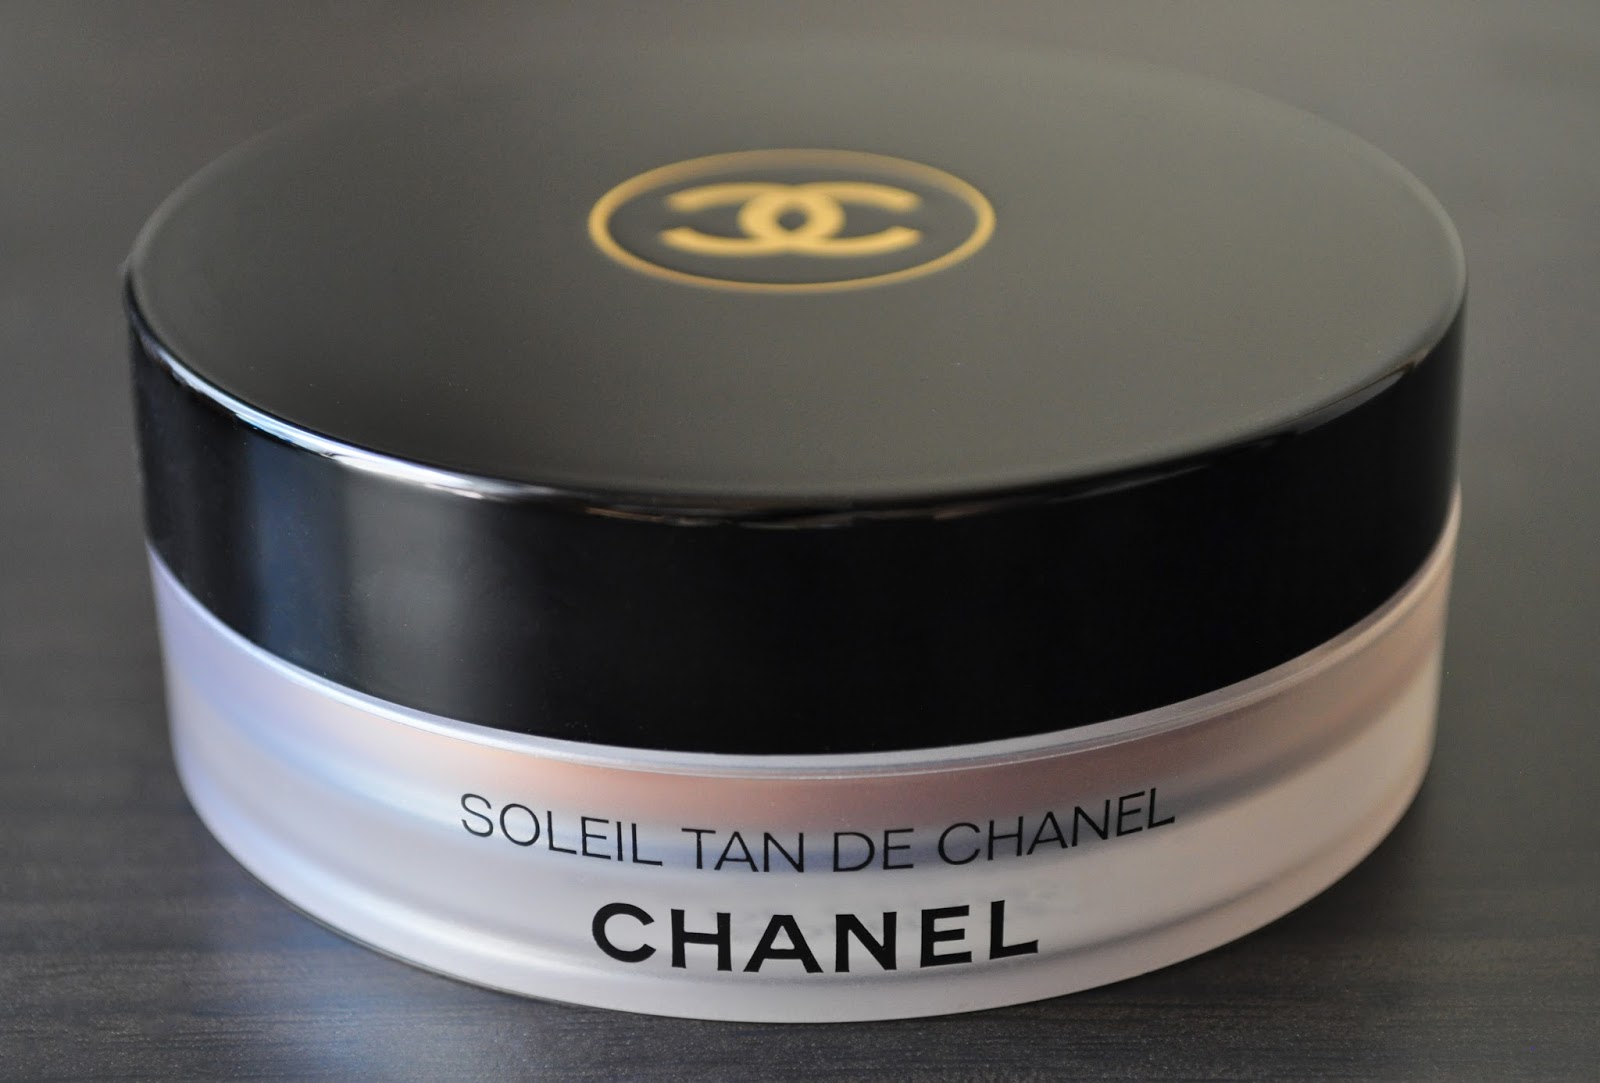 Chanel Soleil Tan De Chanel Bronze Universel Bronzing Makeup Base Review  and Swatches